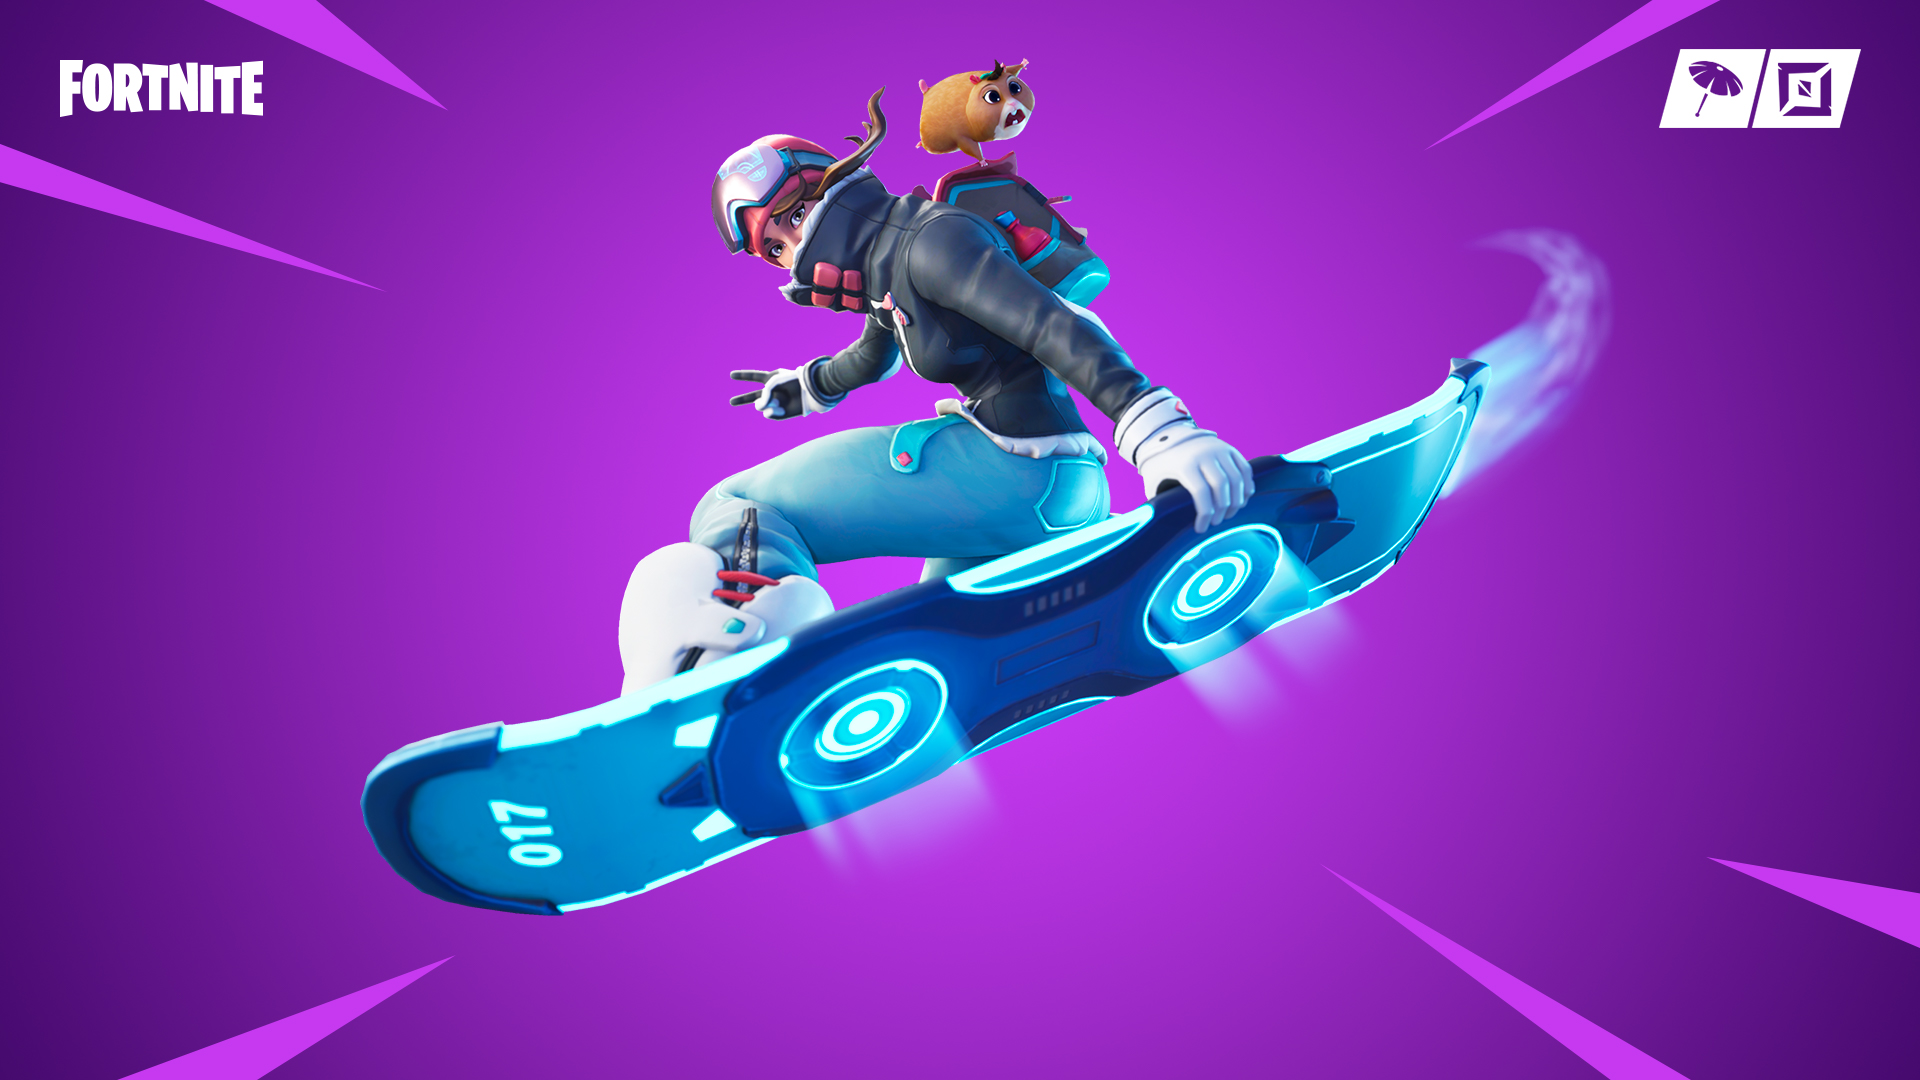 Fortnite Driftin’ Guide – How to Get a Driftboard, Pull off Tricks, and Get a Victory Royale